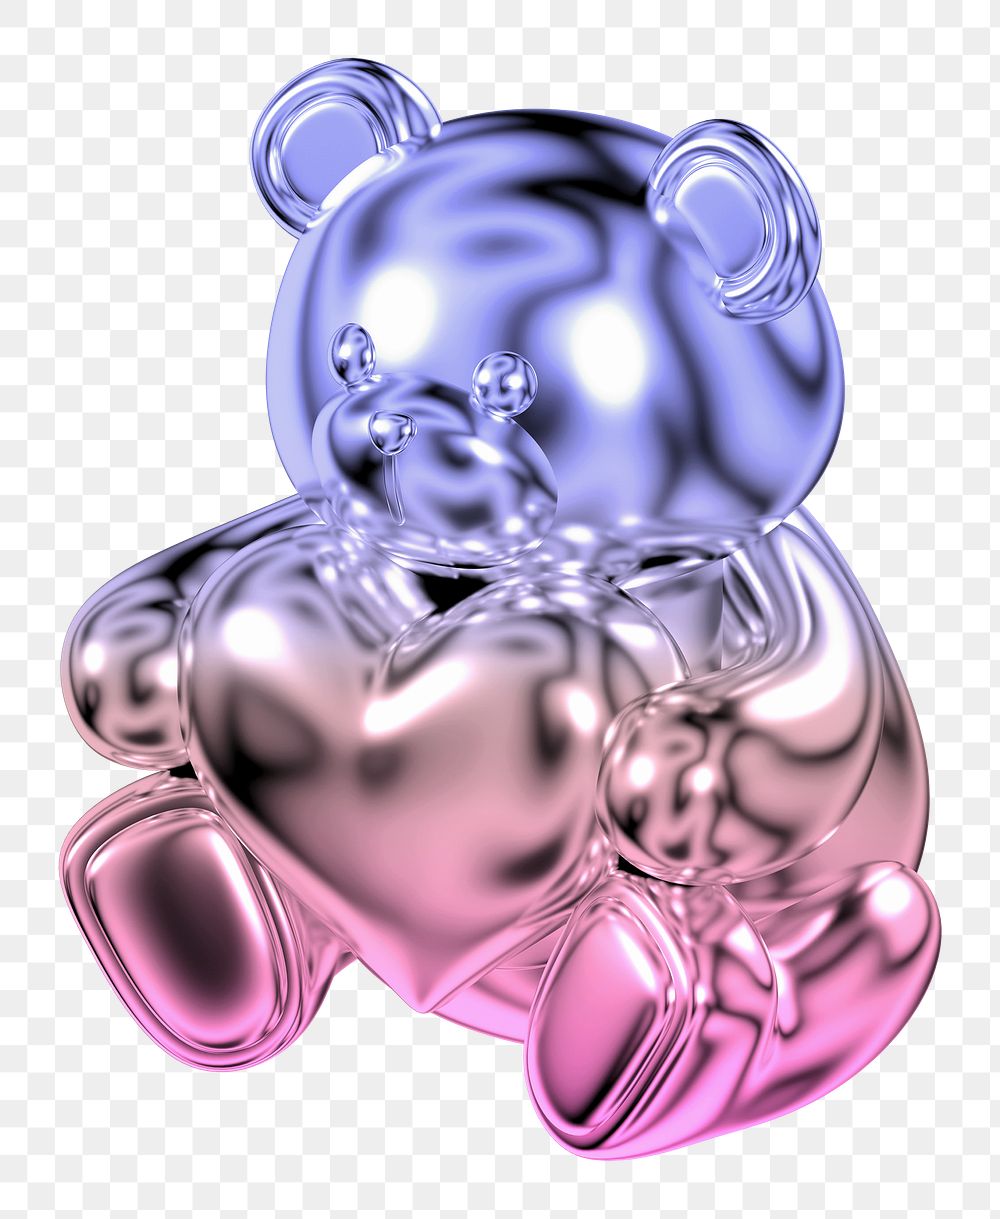 Teddy bear  icon png holographic fluid chrome shape, transparent background